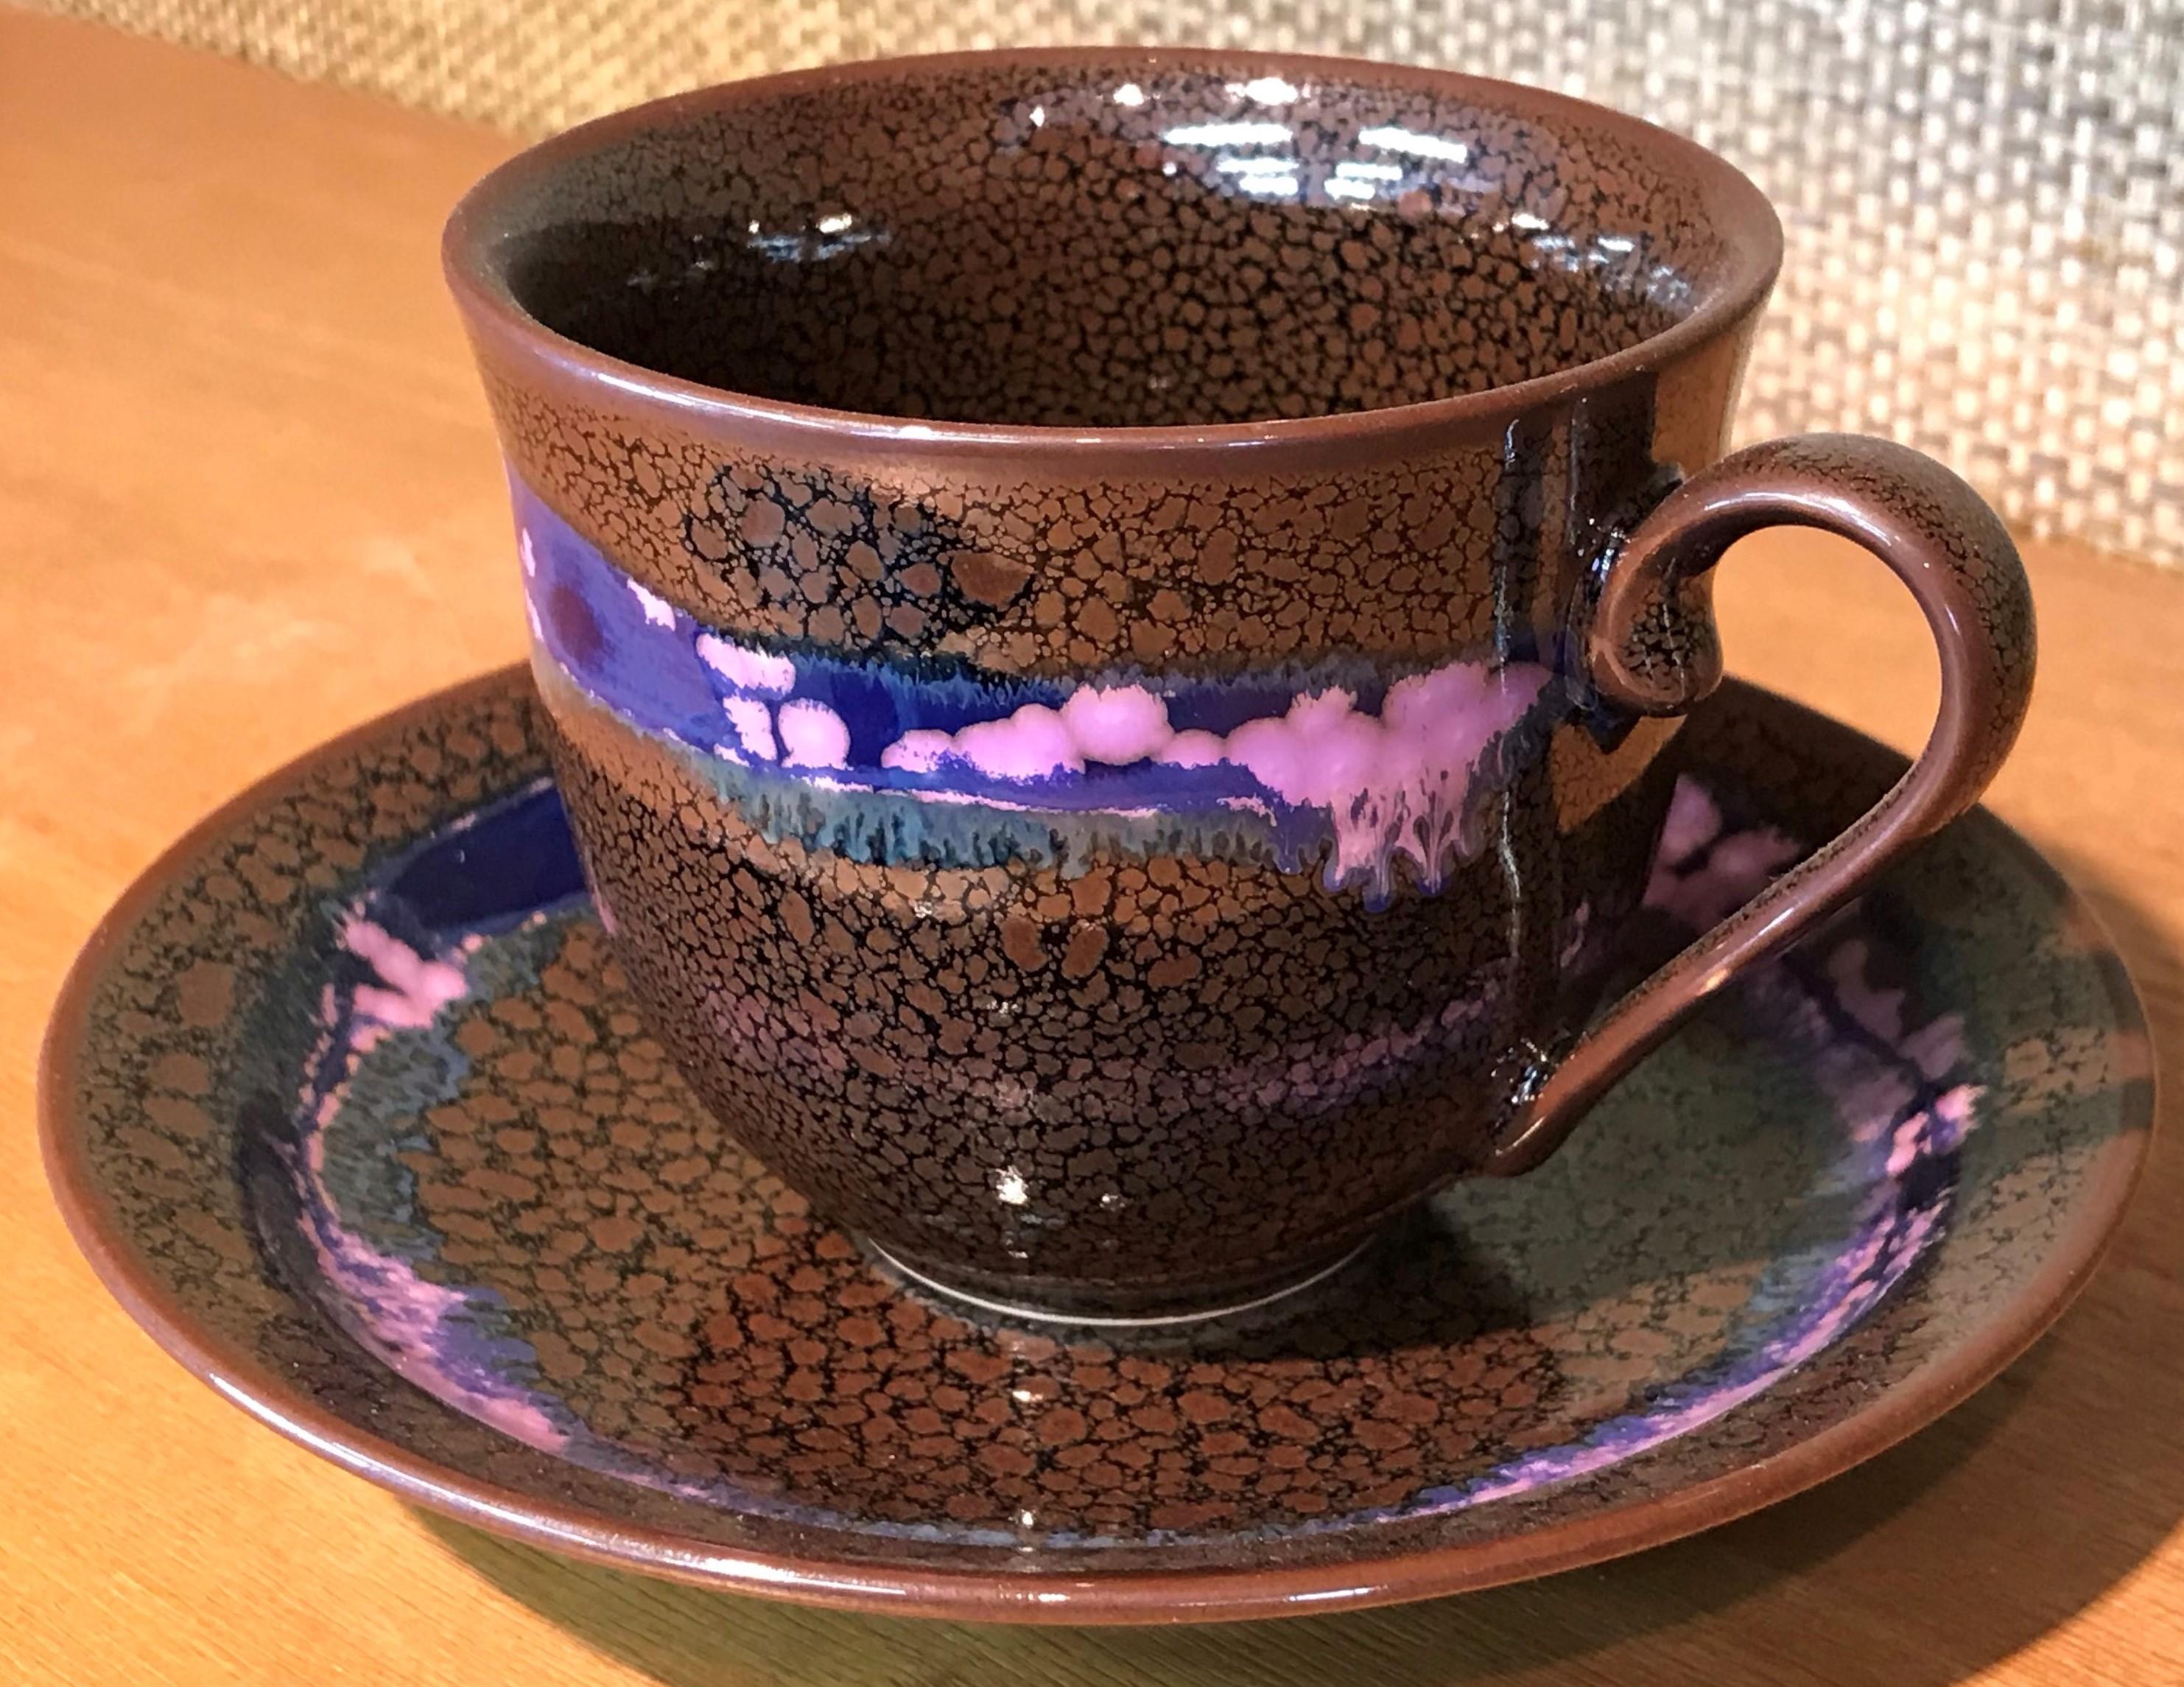 Exceptional Japanese contemporary porcelain cup and saucer, hand-glazed in striking brown and blue on a beautifully shaped body. This is a signed work by a highly acclaimed award-winning master porcelain artist from the Imari-Arita region of